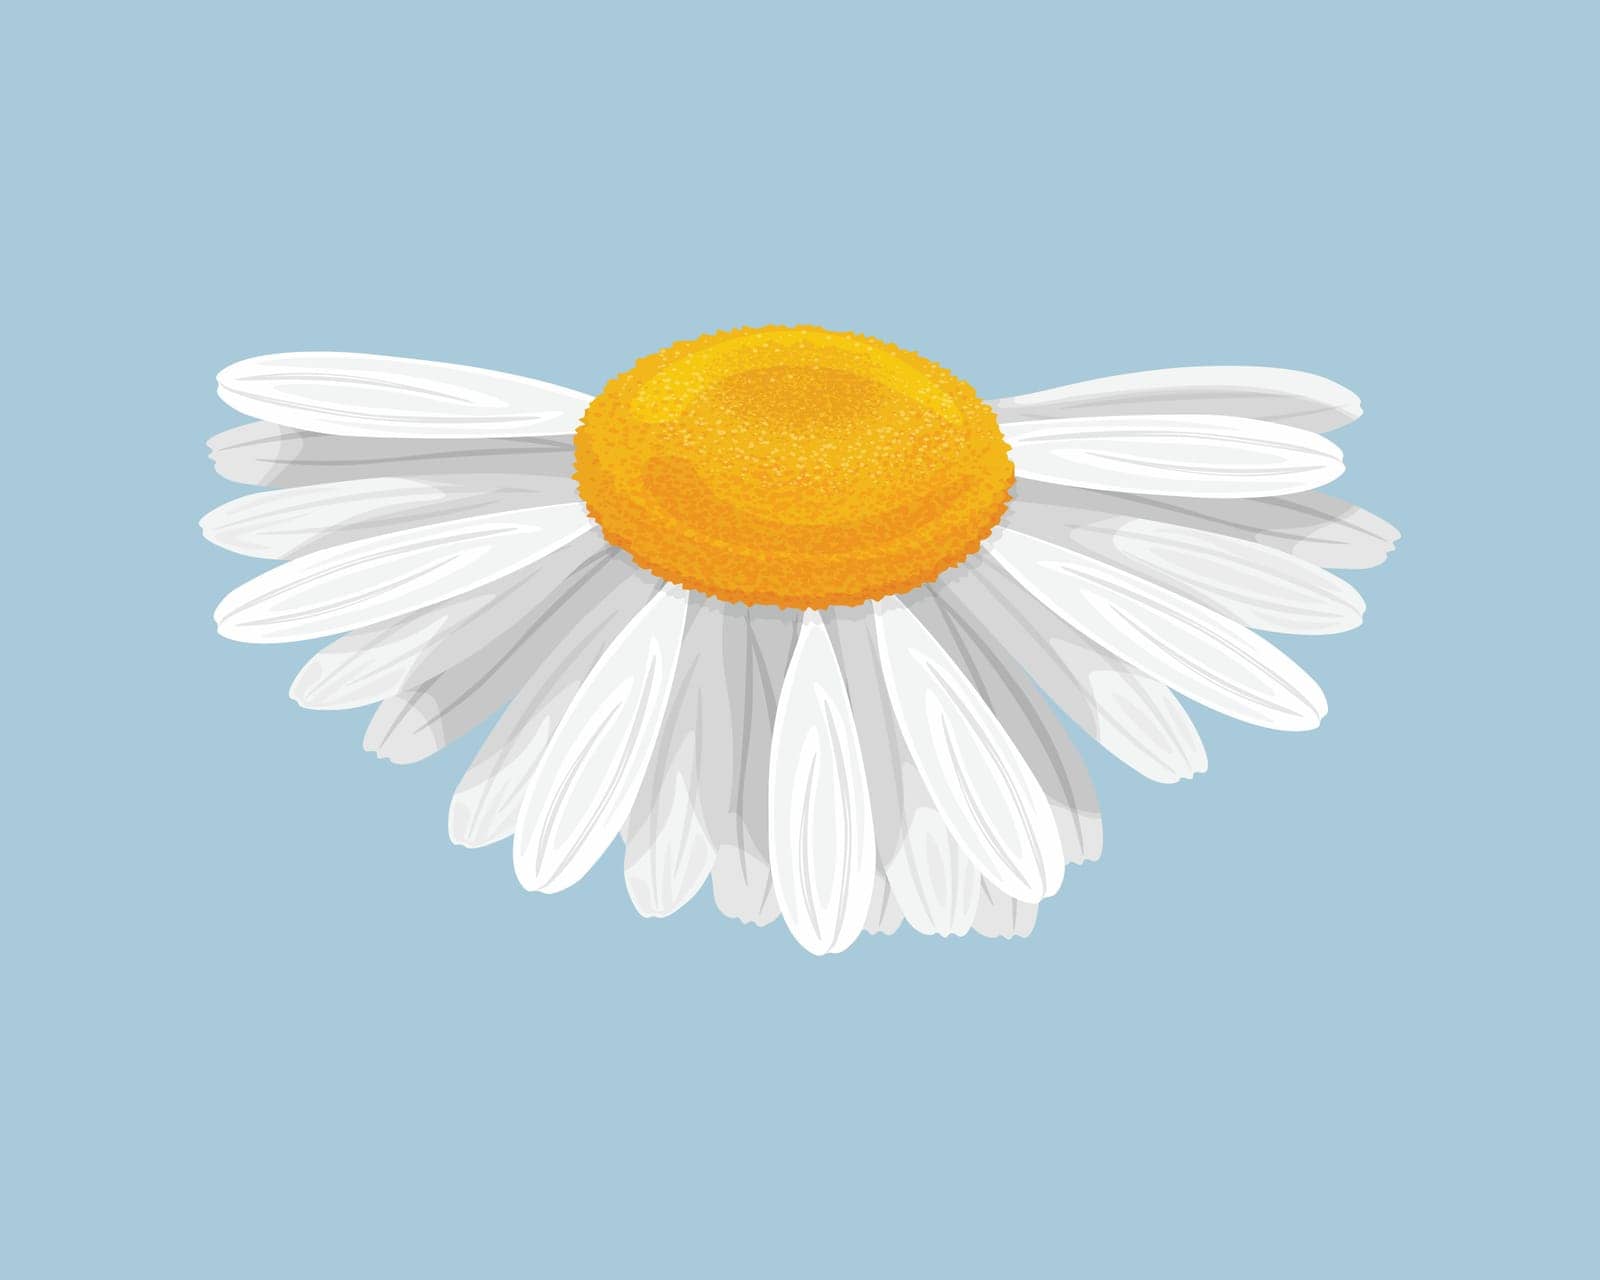 Chamomile. A white daisy flower on a yellow background. A bright wildflower. Vector illustration by NastyaN